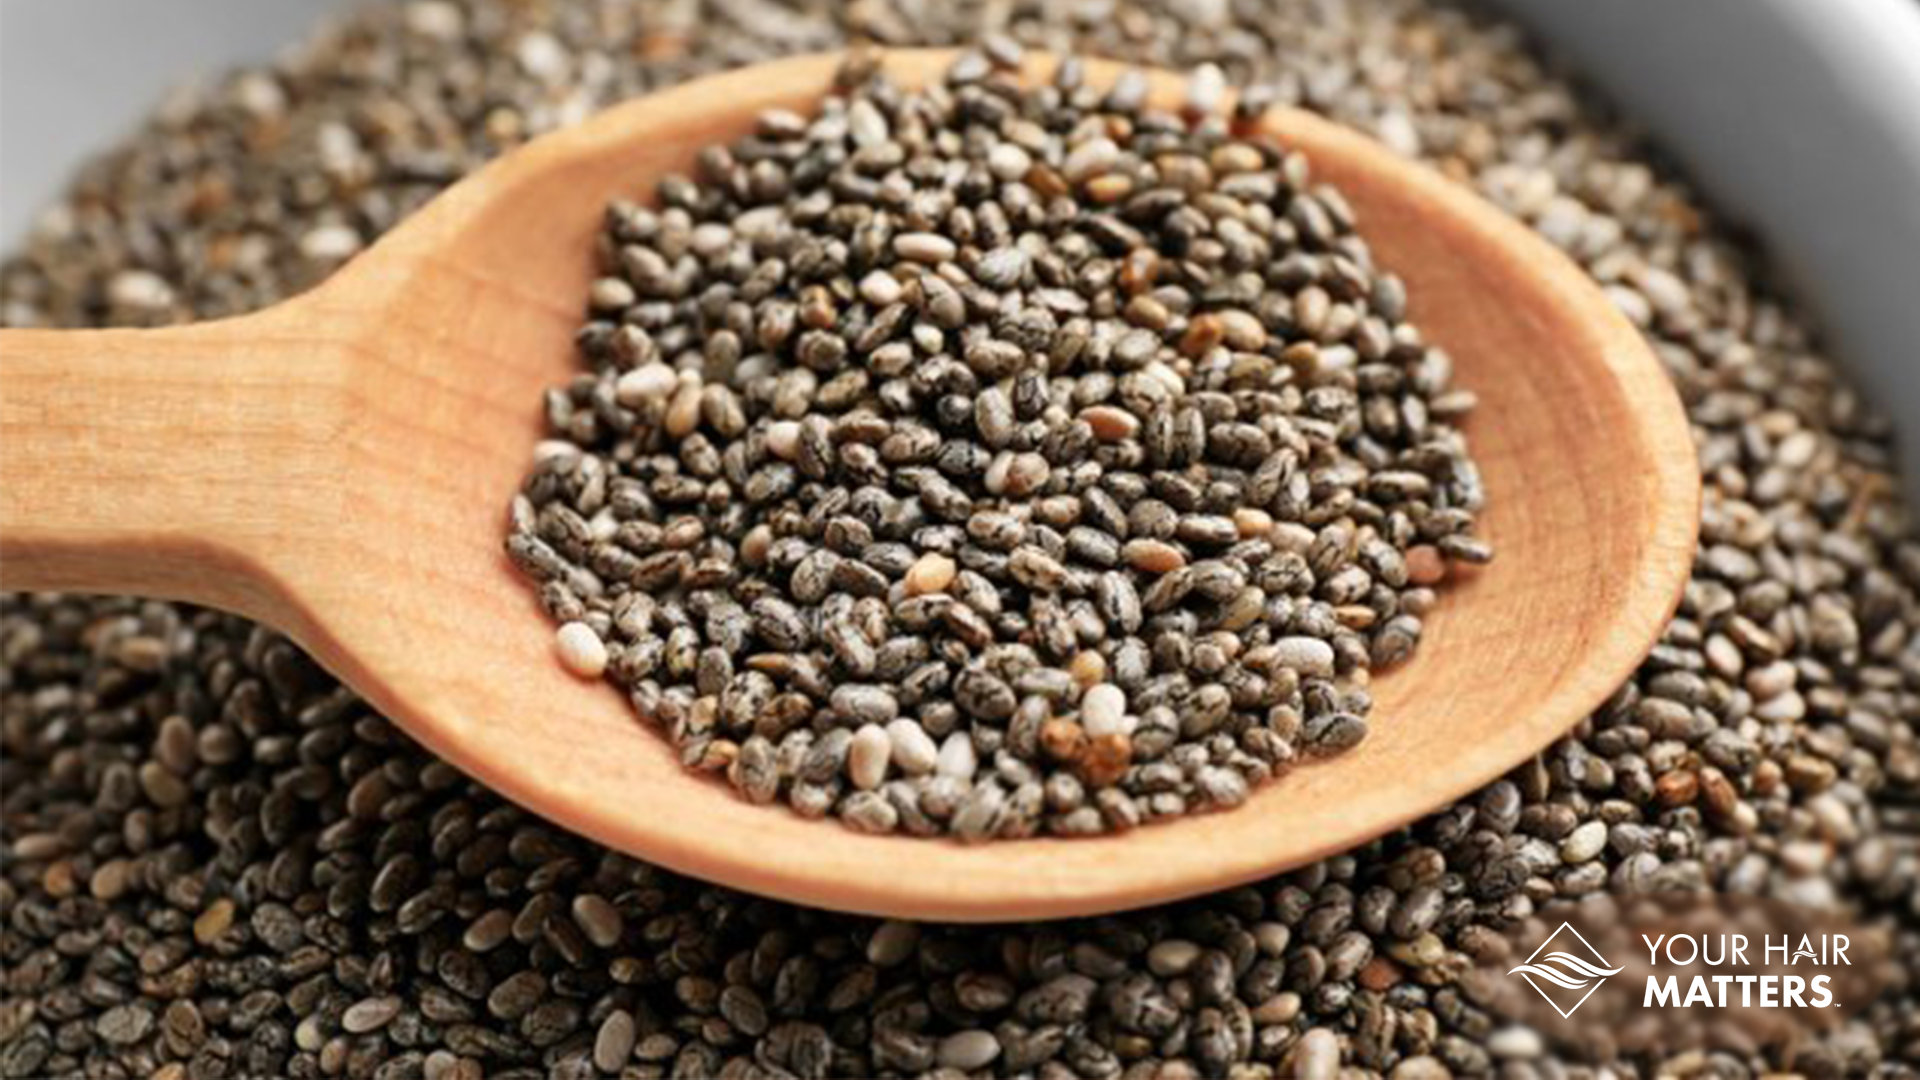 Chia Seed | Henna Extract | Hair Care | Alopecia | Your Hair Matters | Feed your hair | YOURS | Male Pattern Baldness | Hair Thinning